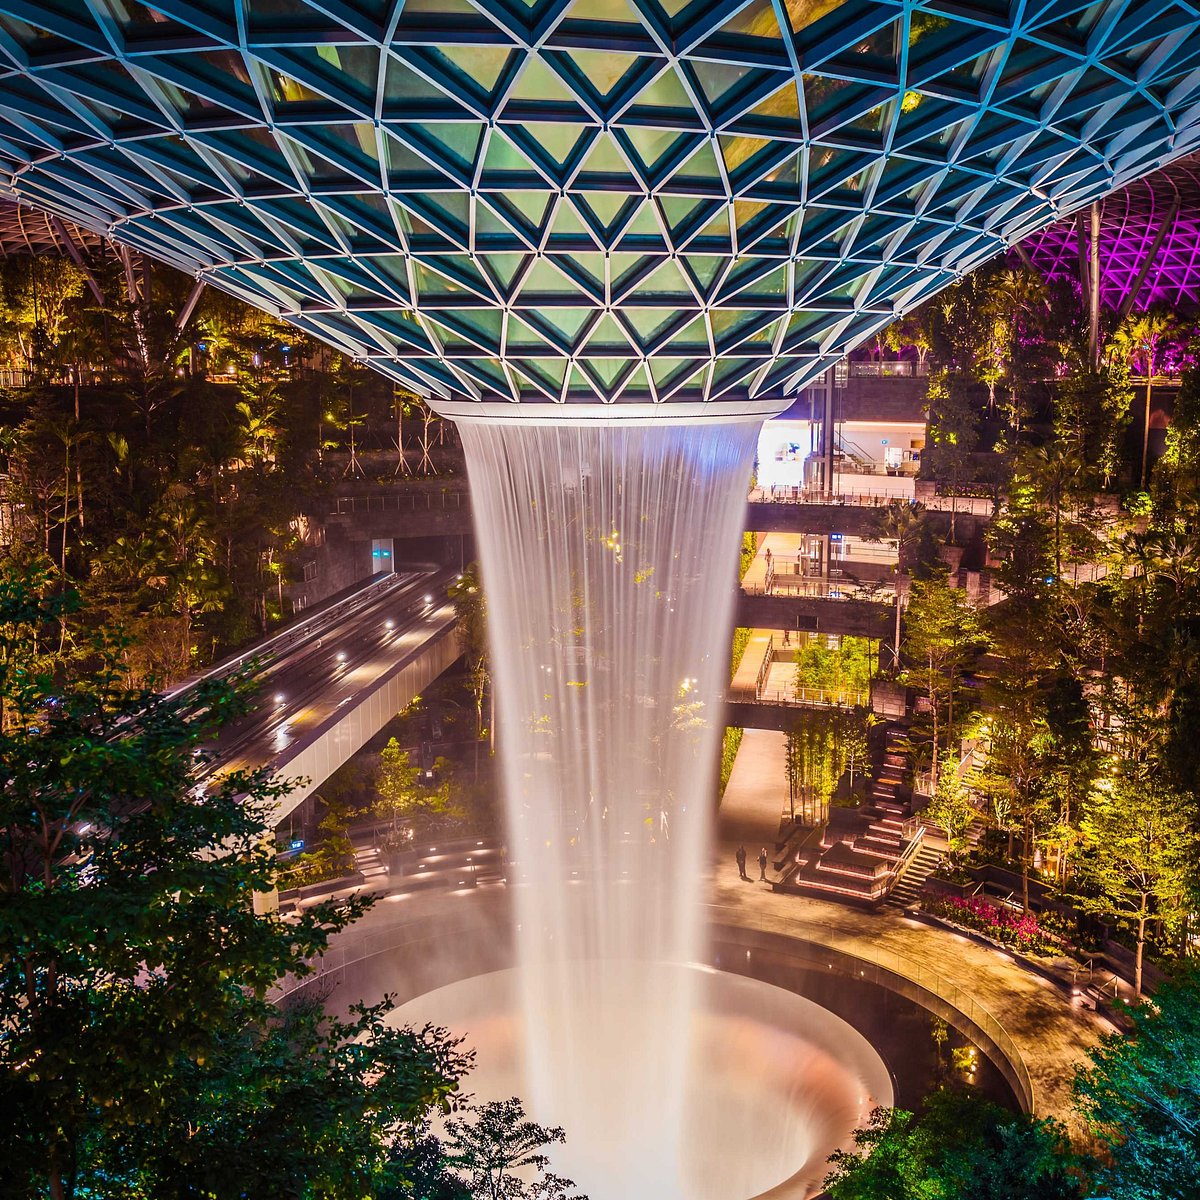 Inside Singapore's Changi Airport: Jewel, a rainforest with a 40-metre  indoor waterfall